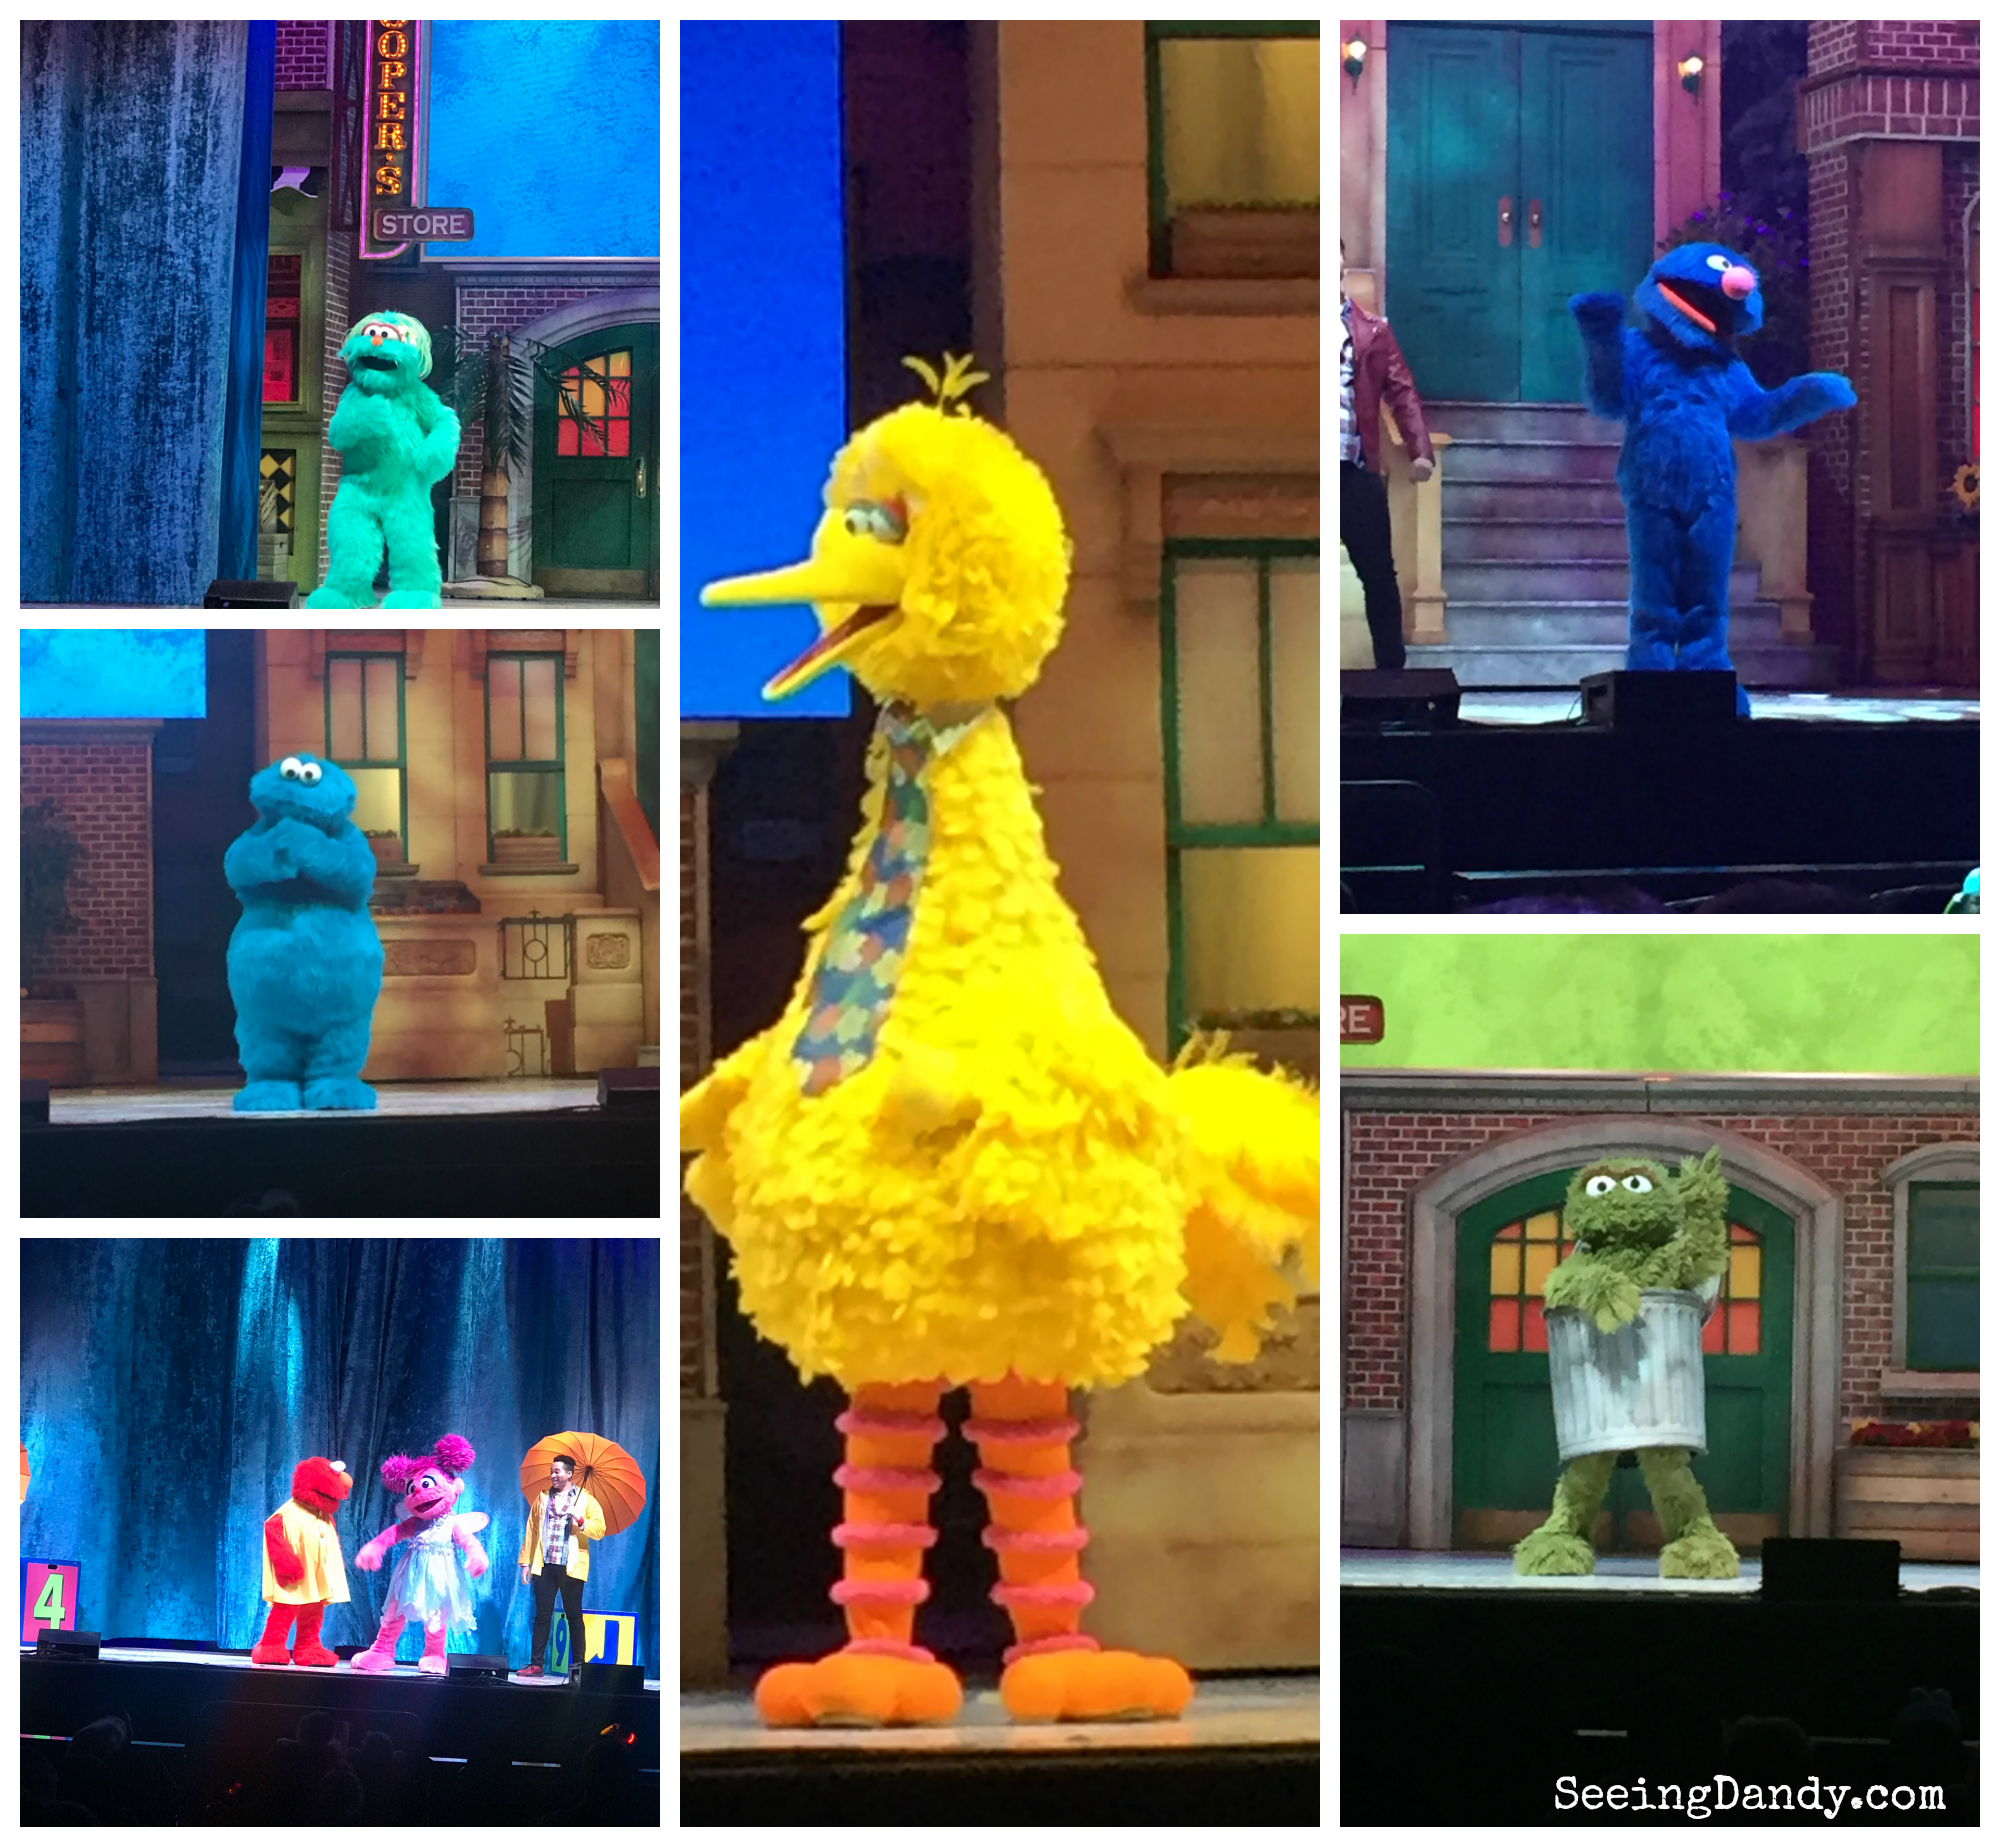 Sesame Street Live characters performing at family Valentine's Day show.